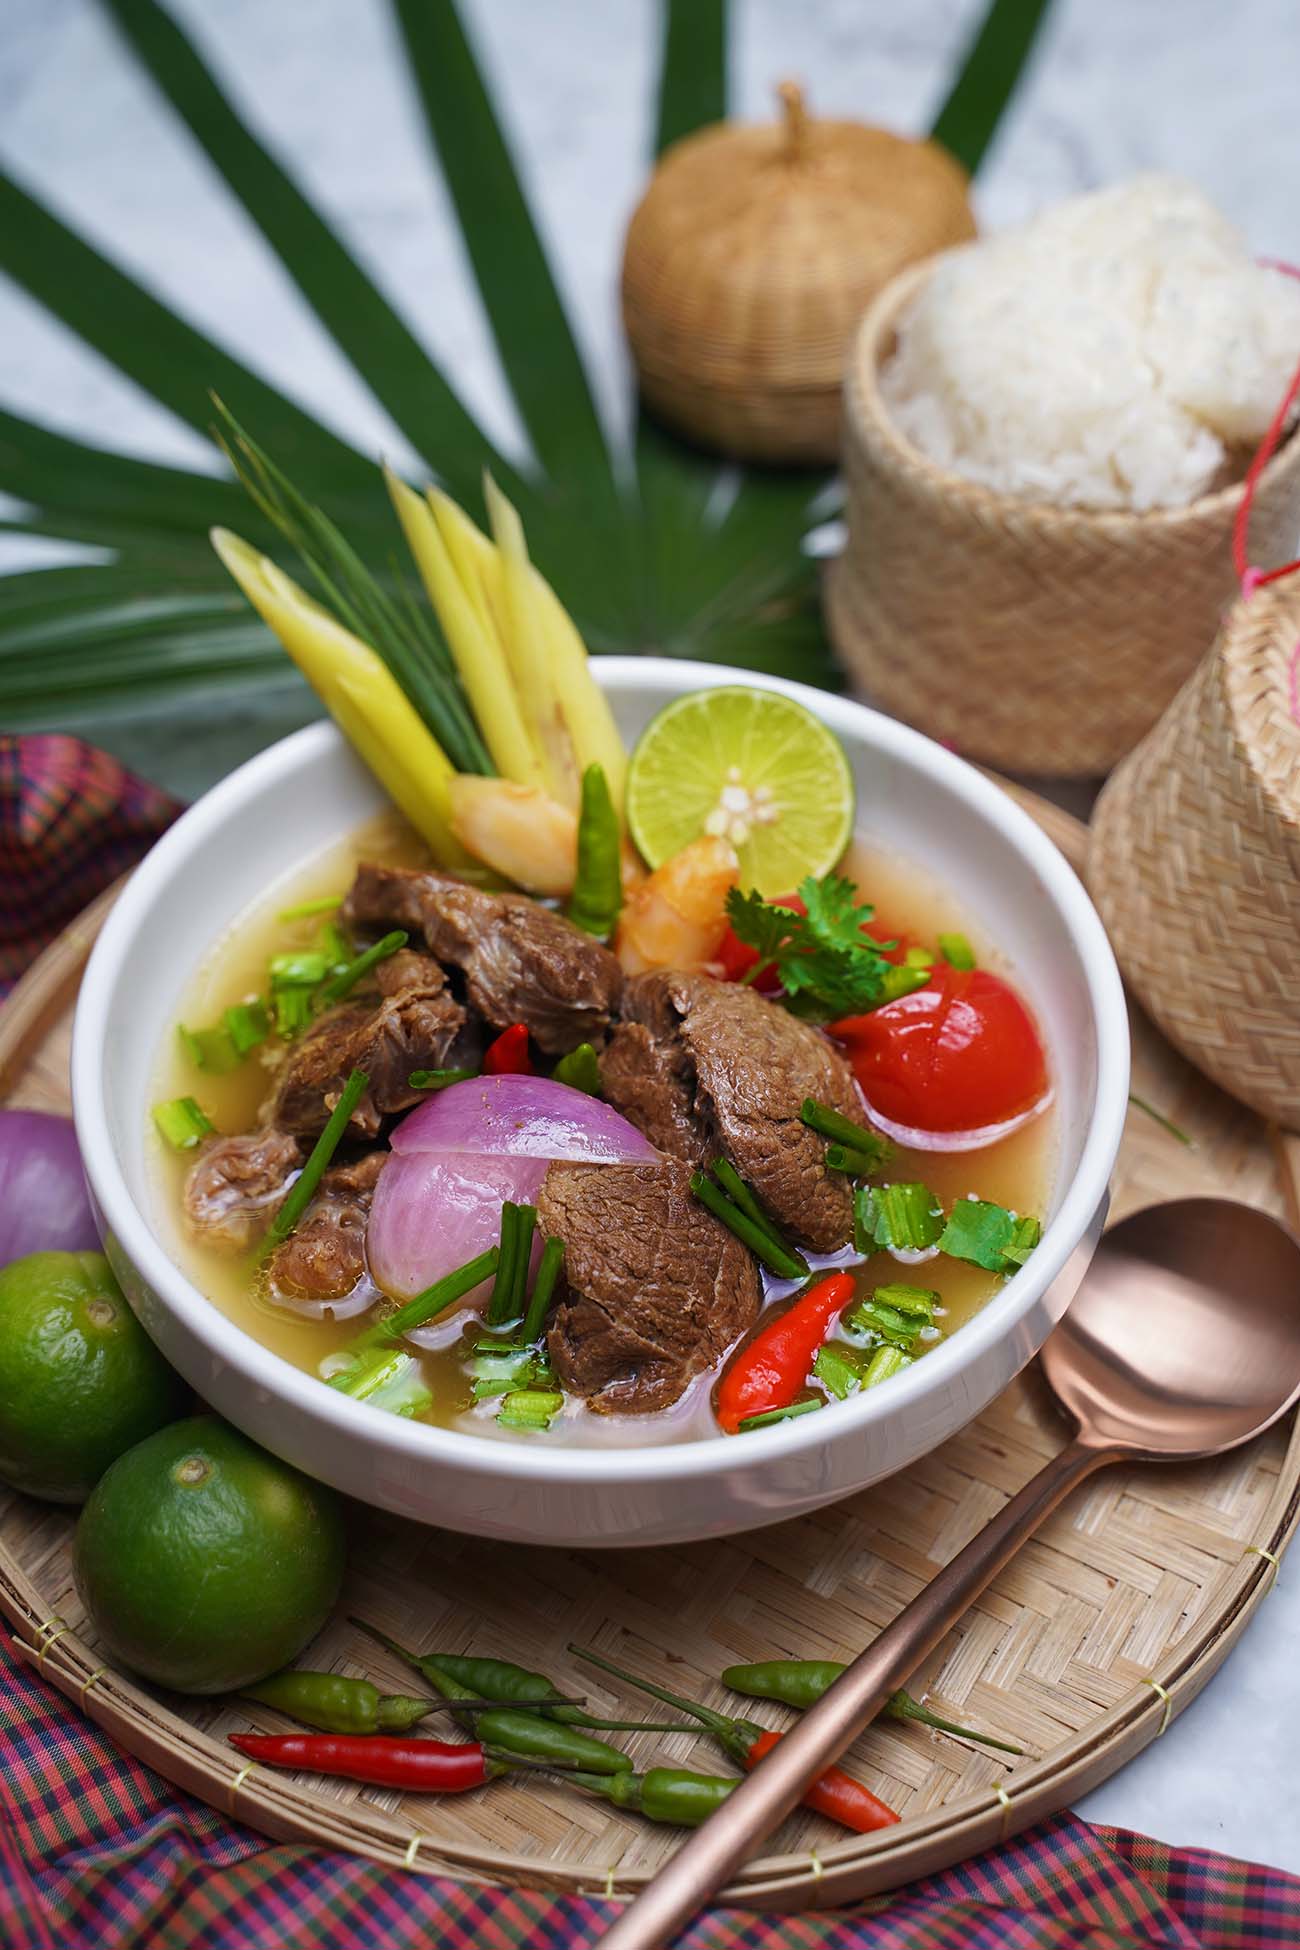 Thai Spicy & Sour Braised Silver Shank Soup